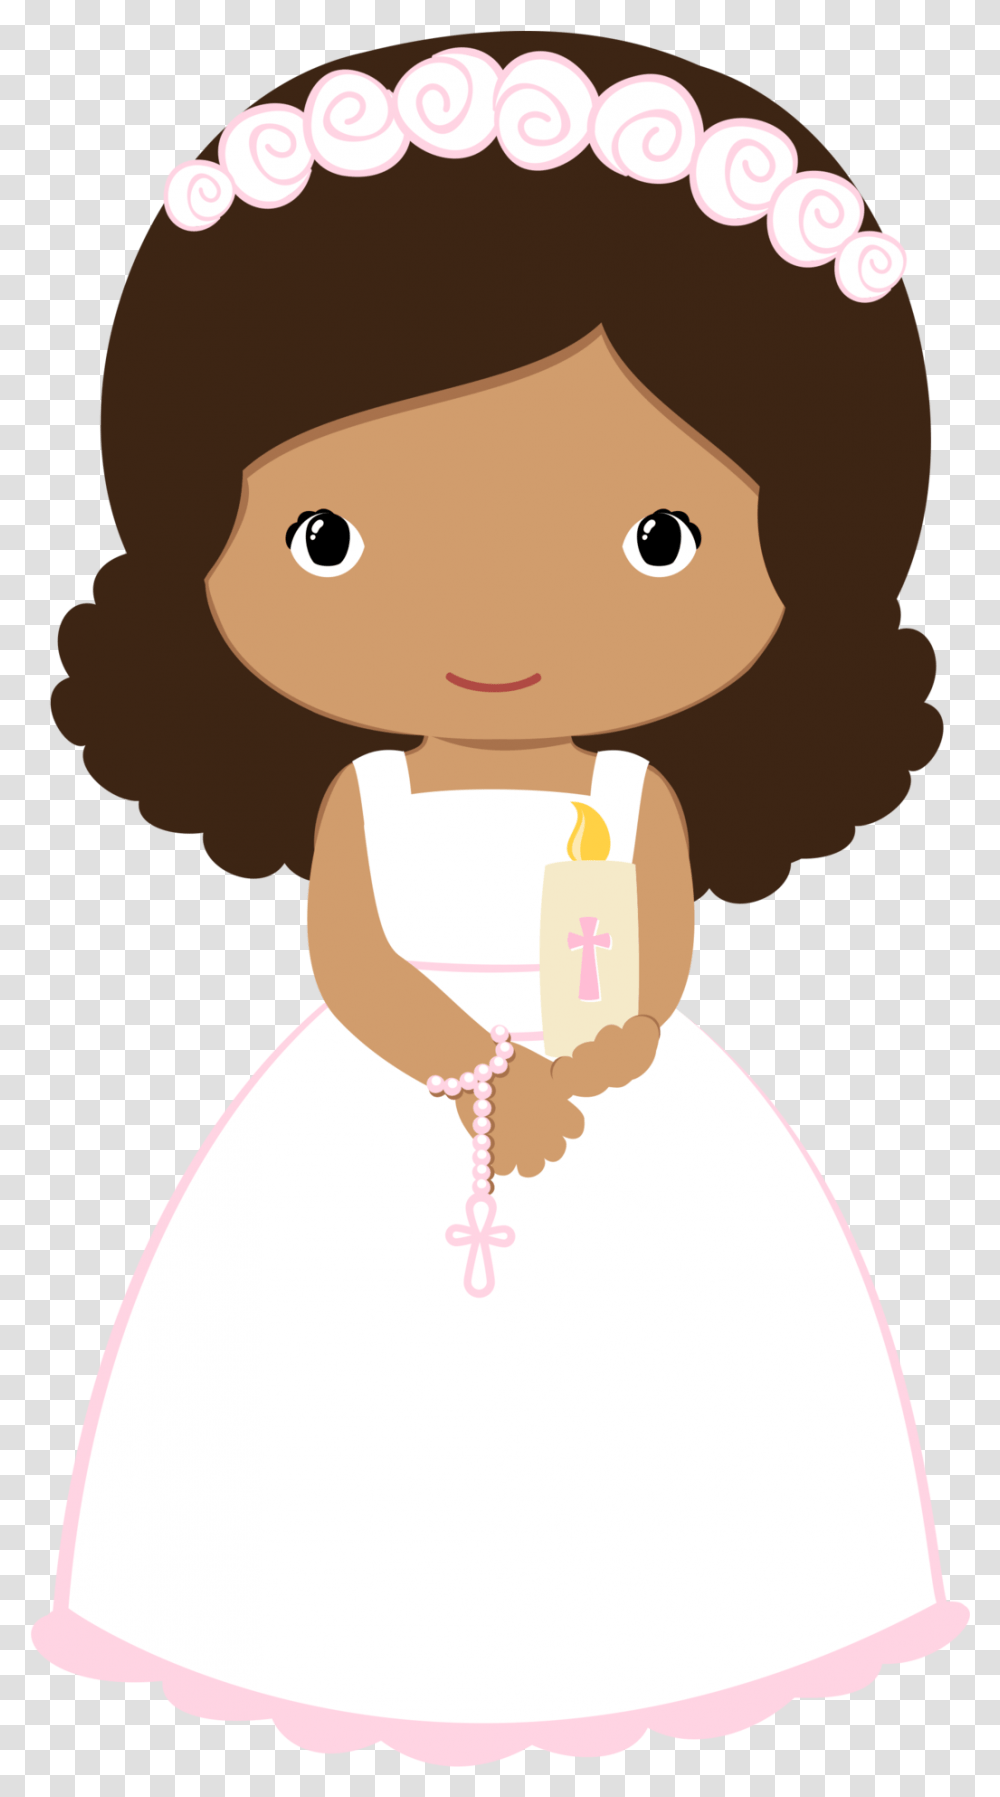 Communion Girl Wave Hair Image Clipart Communion Girl Wave Hair, Snowman, Winter, Outdoors, Nature Transparent Png